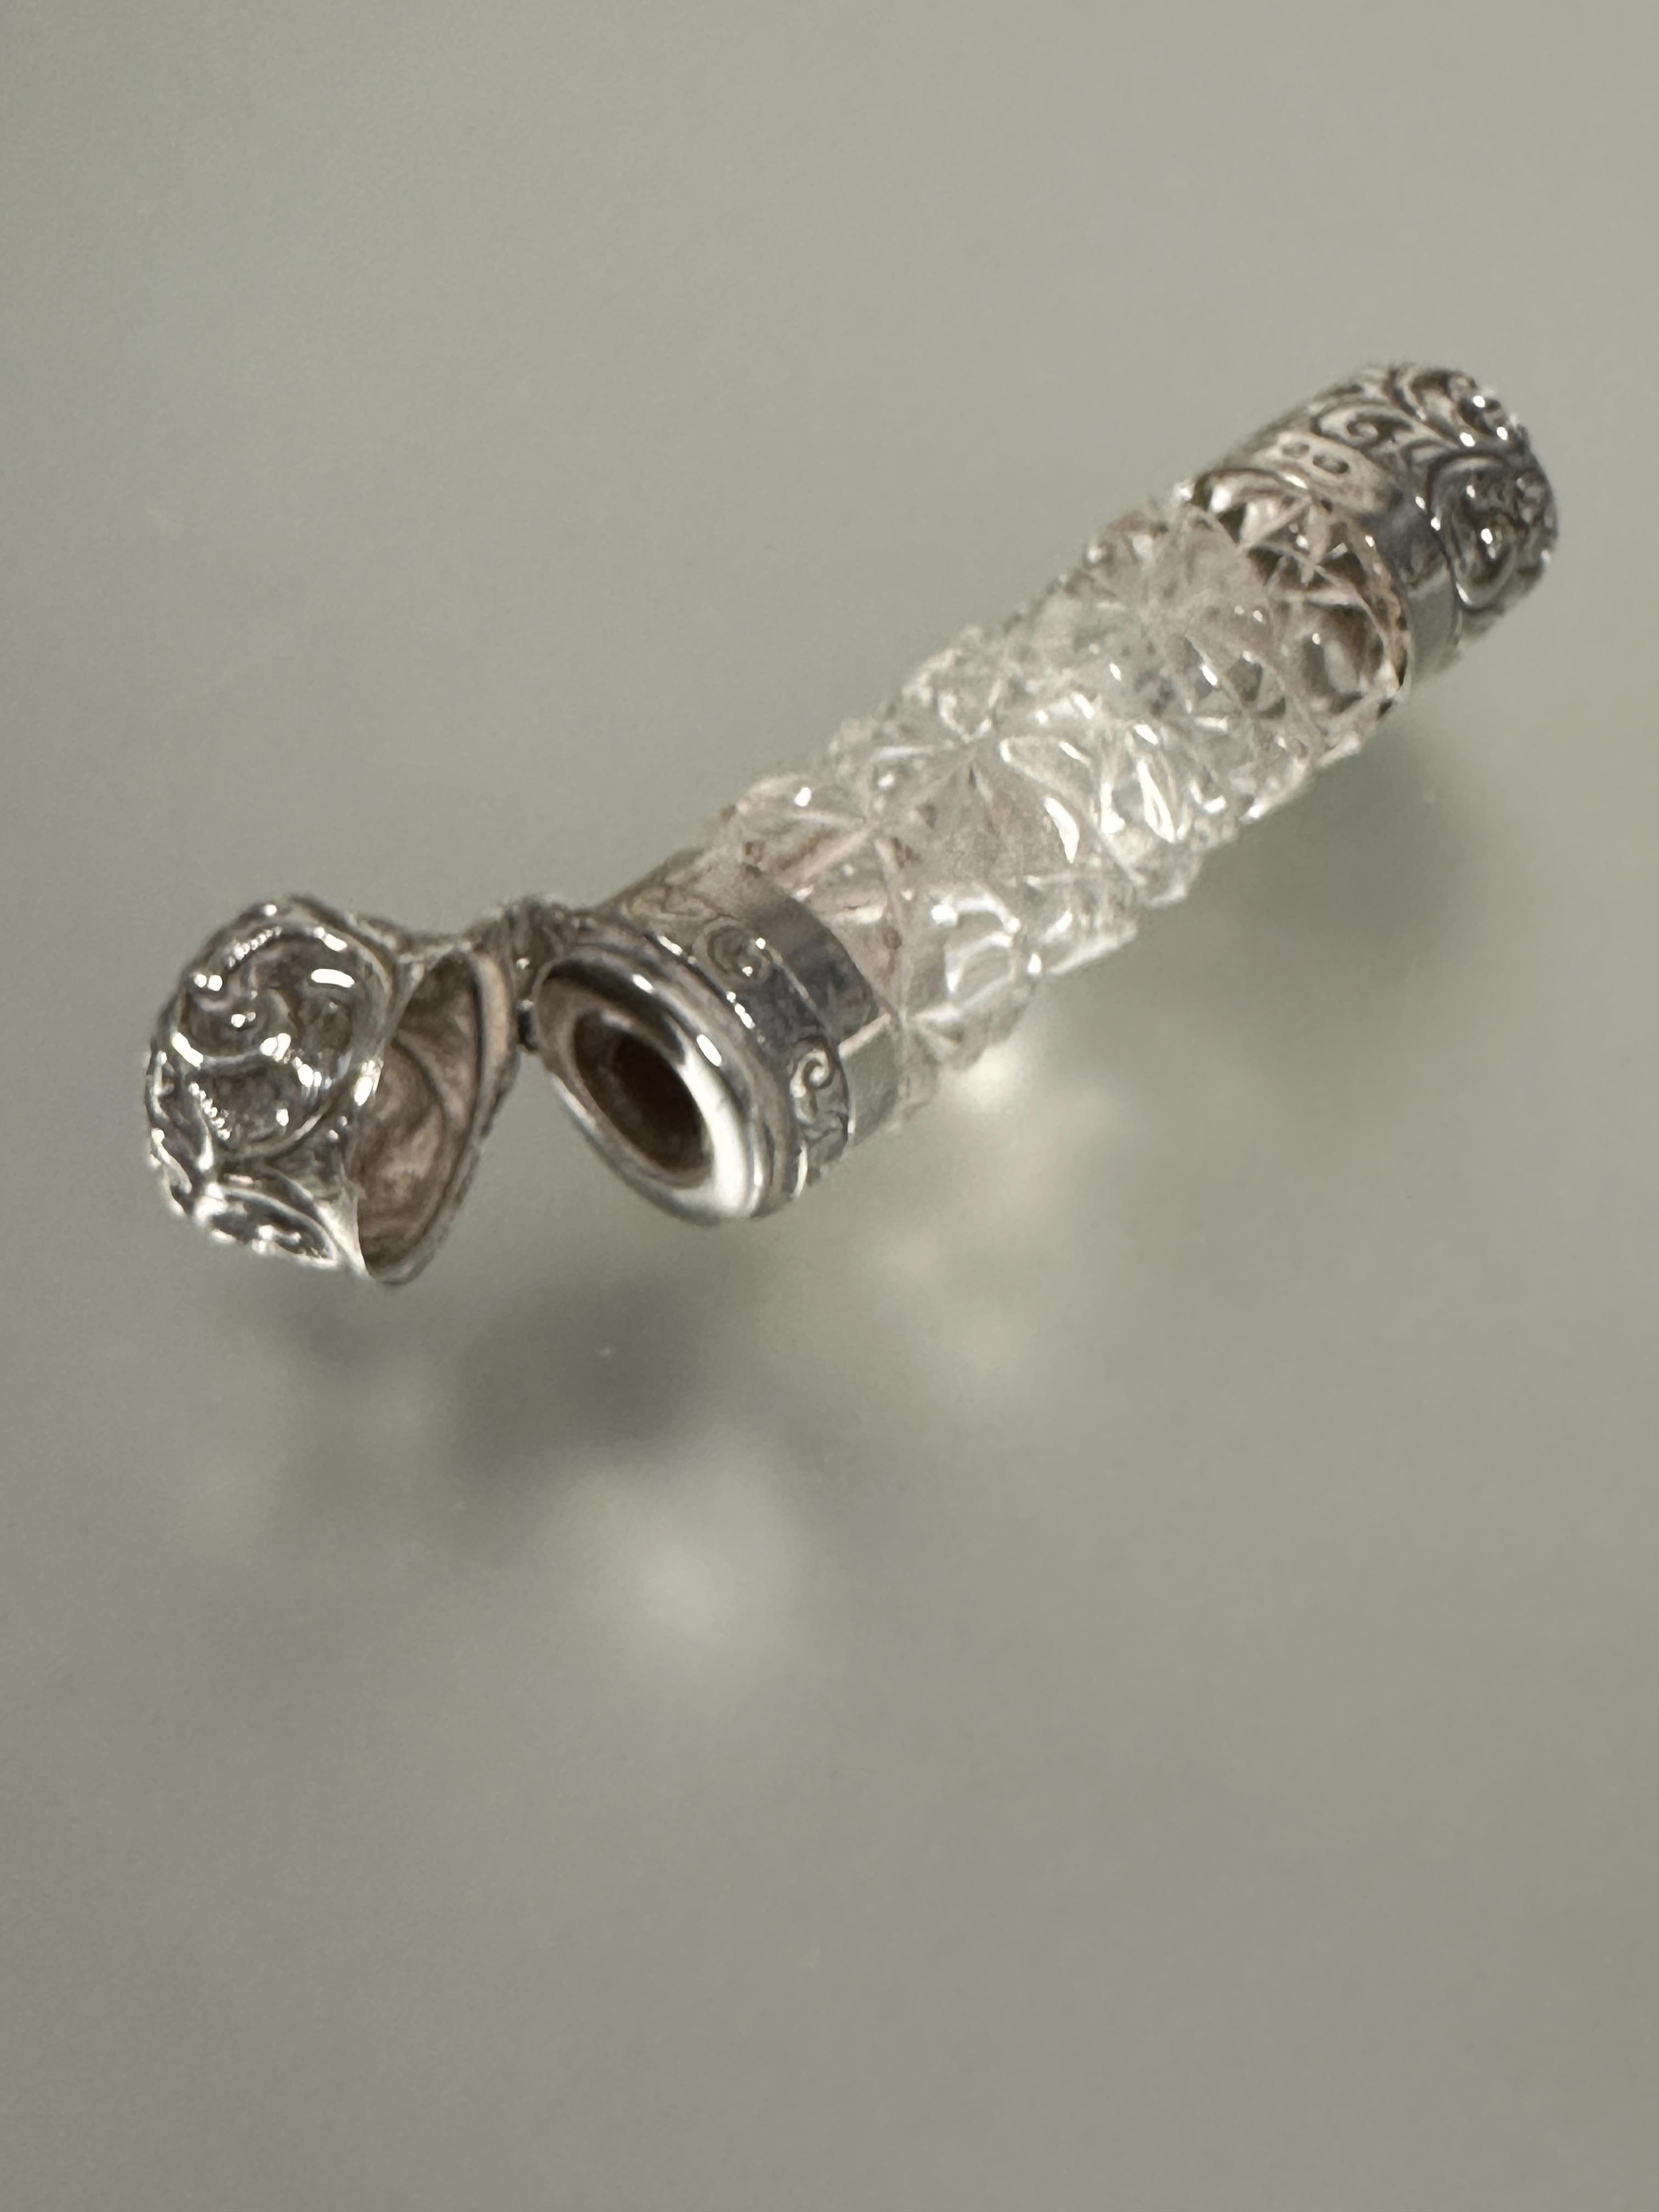 A Victorian silver mounted ended smelling salts bottle with hob nail cut design missing inner - Image 2 of 2